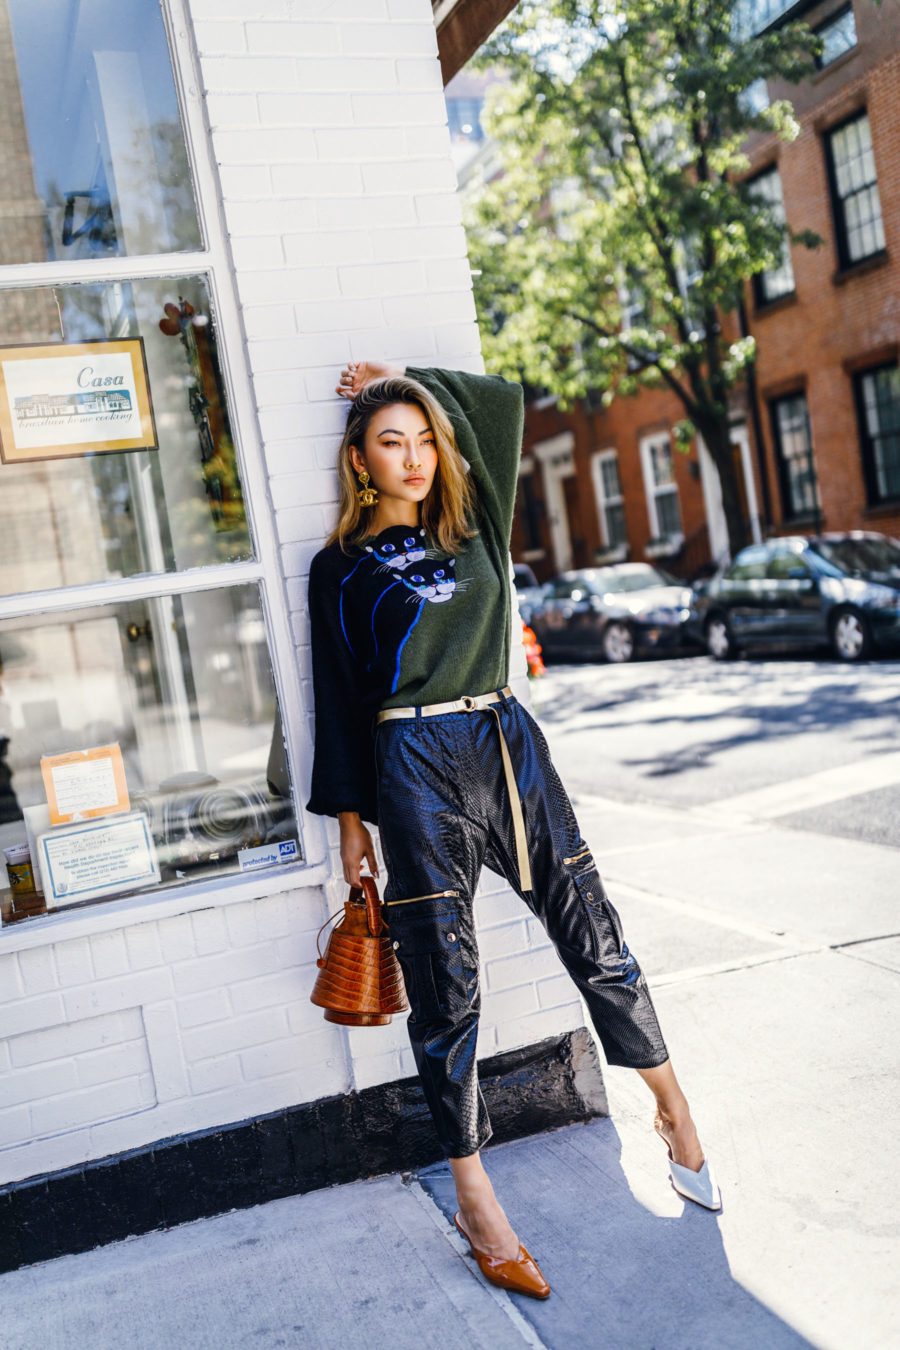 fashion blogger jessica wang shares ugly fashion trends of 2020 wearing leather cargo pants // Notjessfashion.com